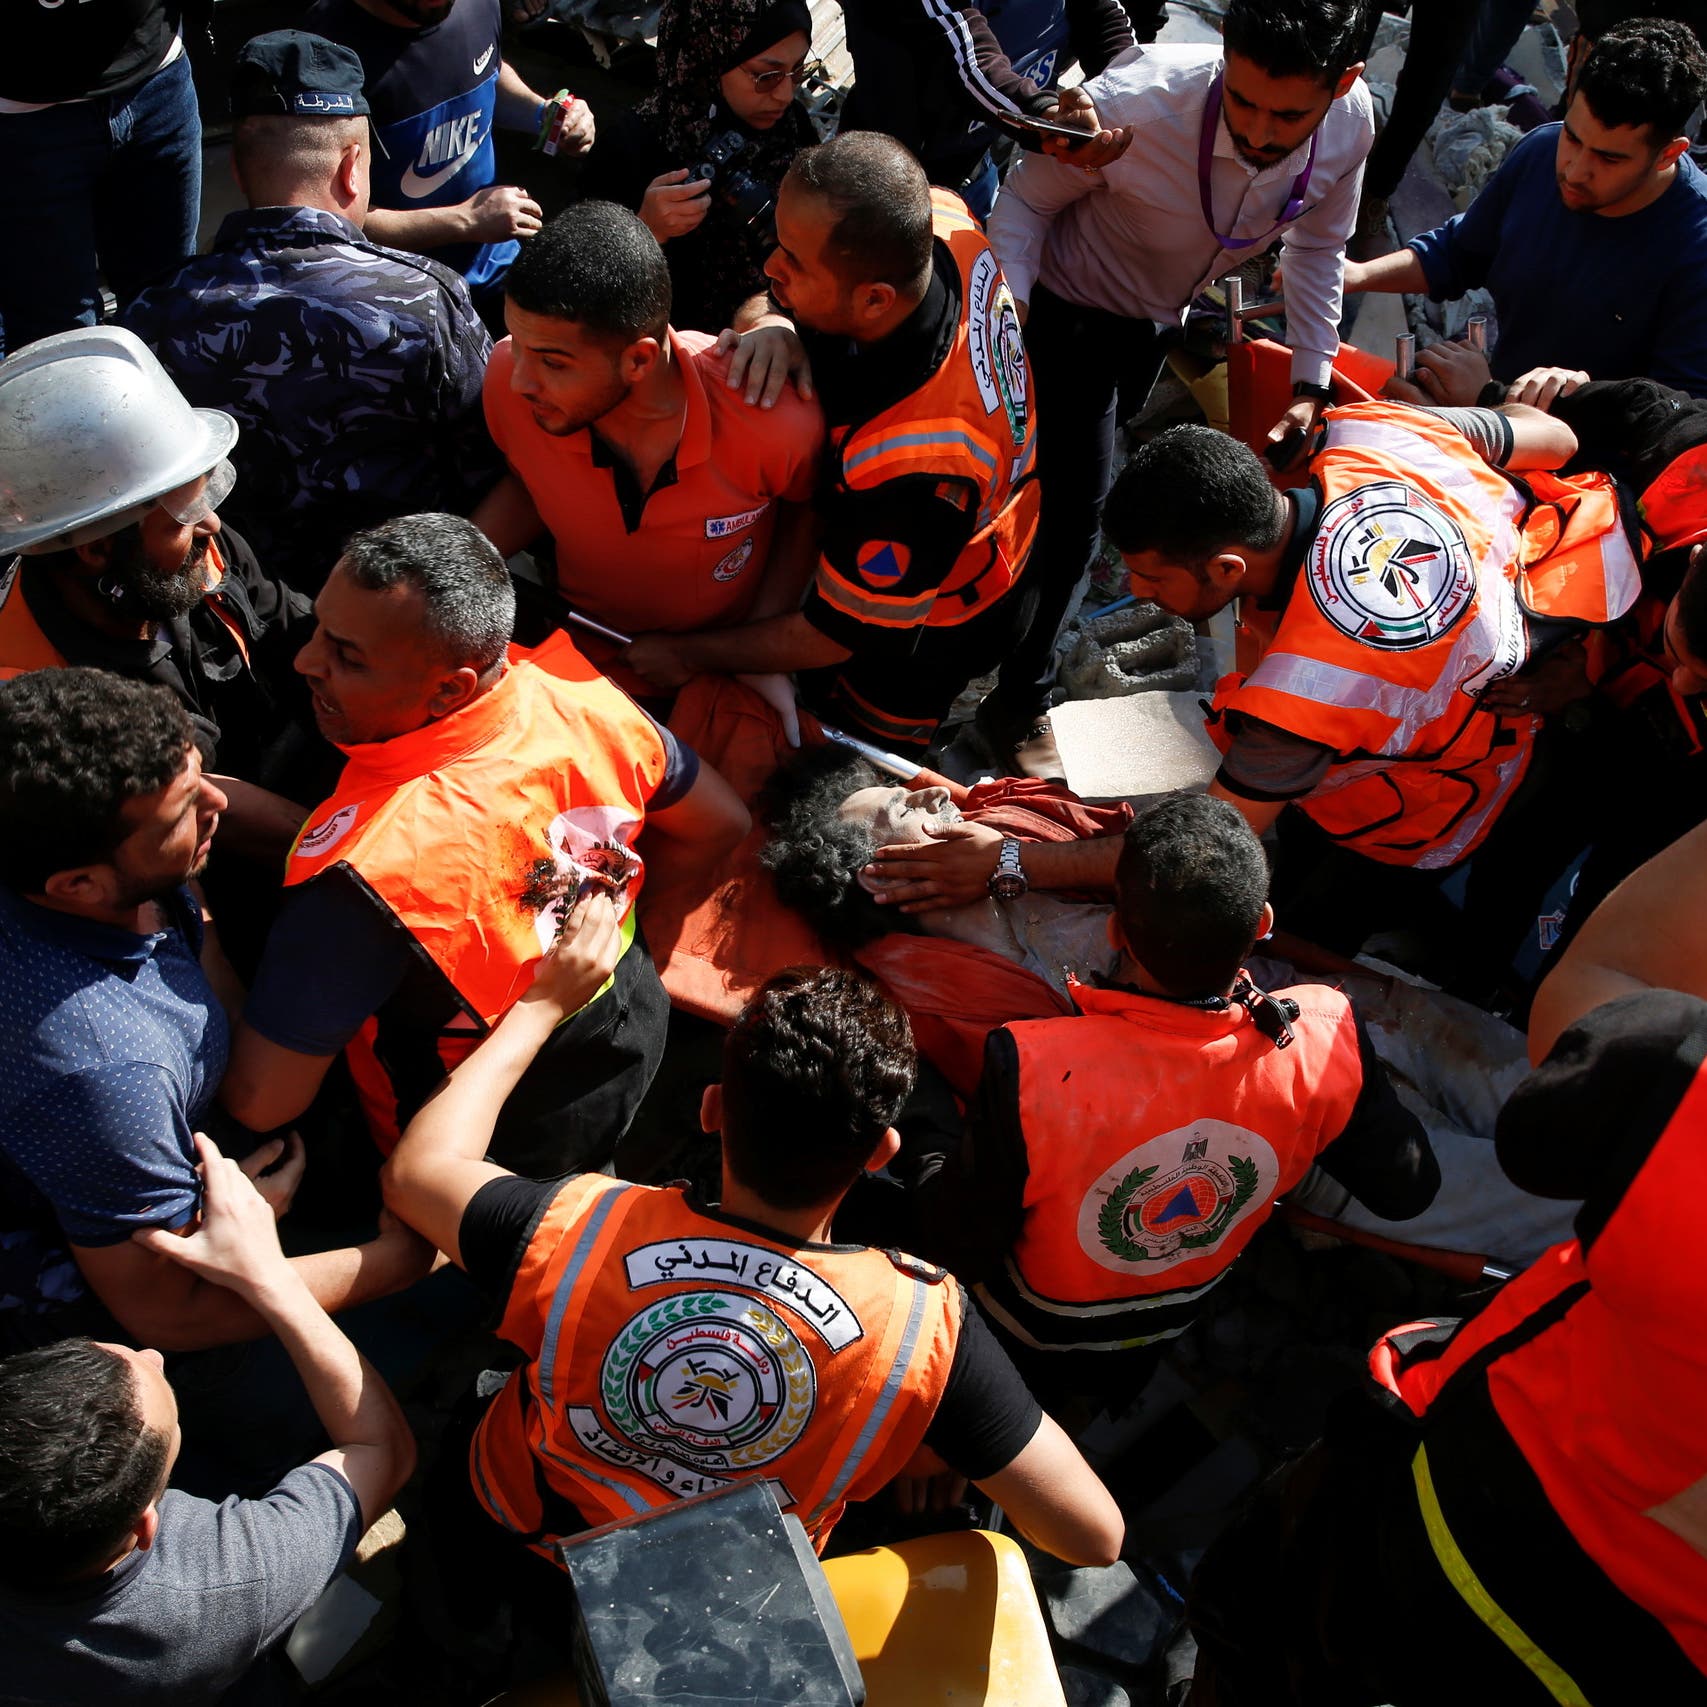 Israel’s ‘bombardment’ in Gaza preventing medics from helping civilians: Red Cross